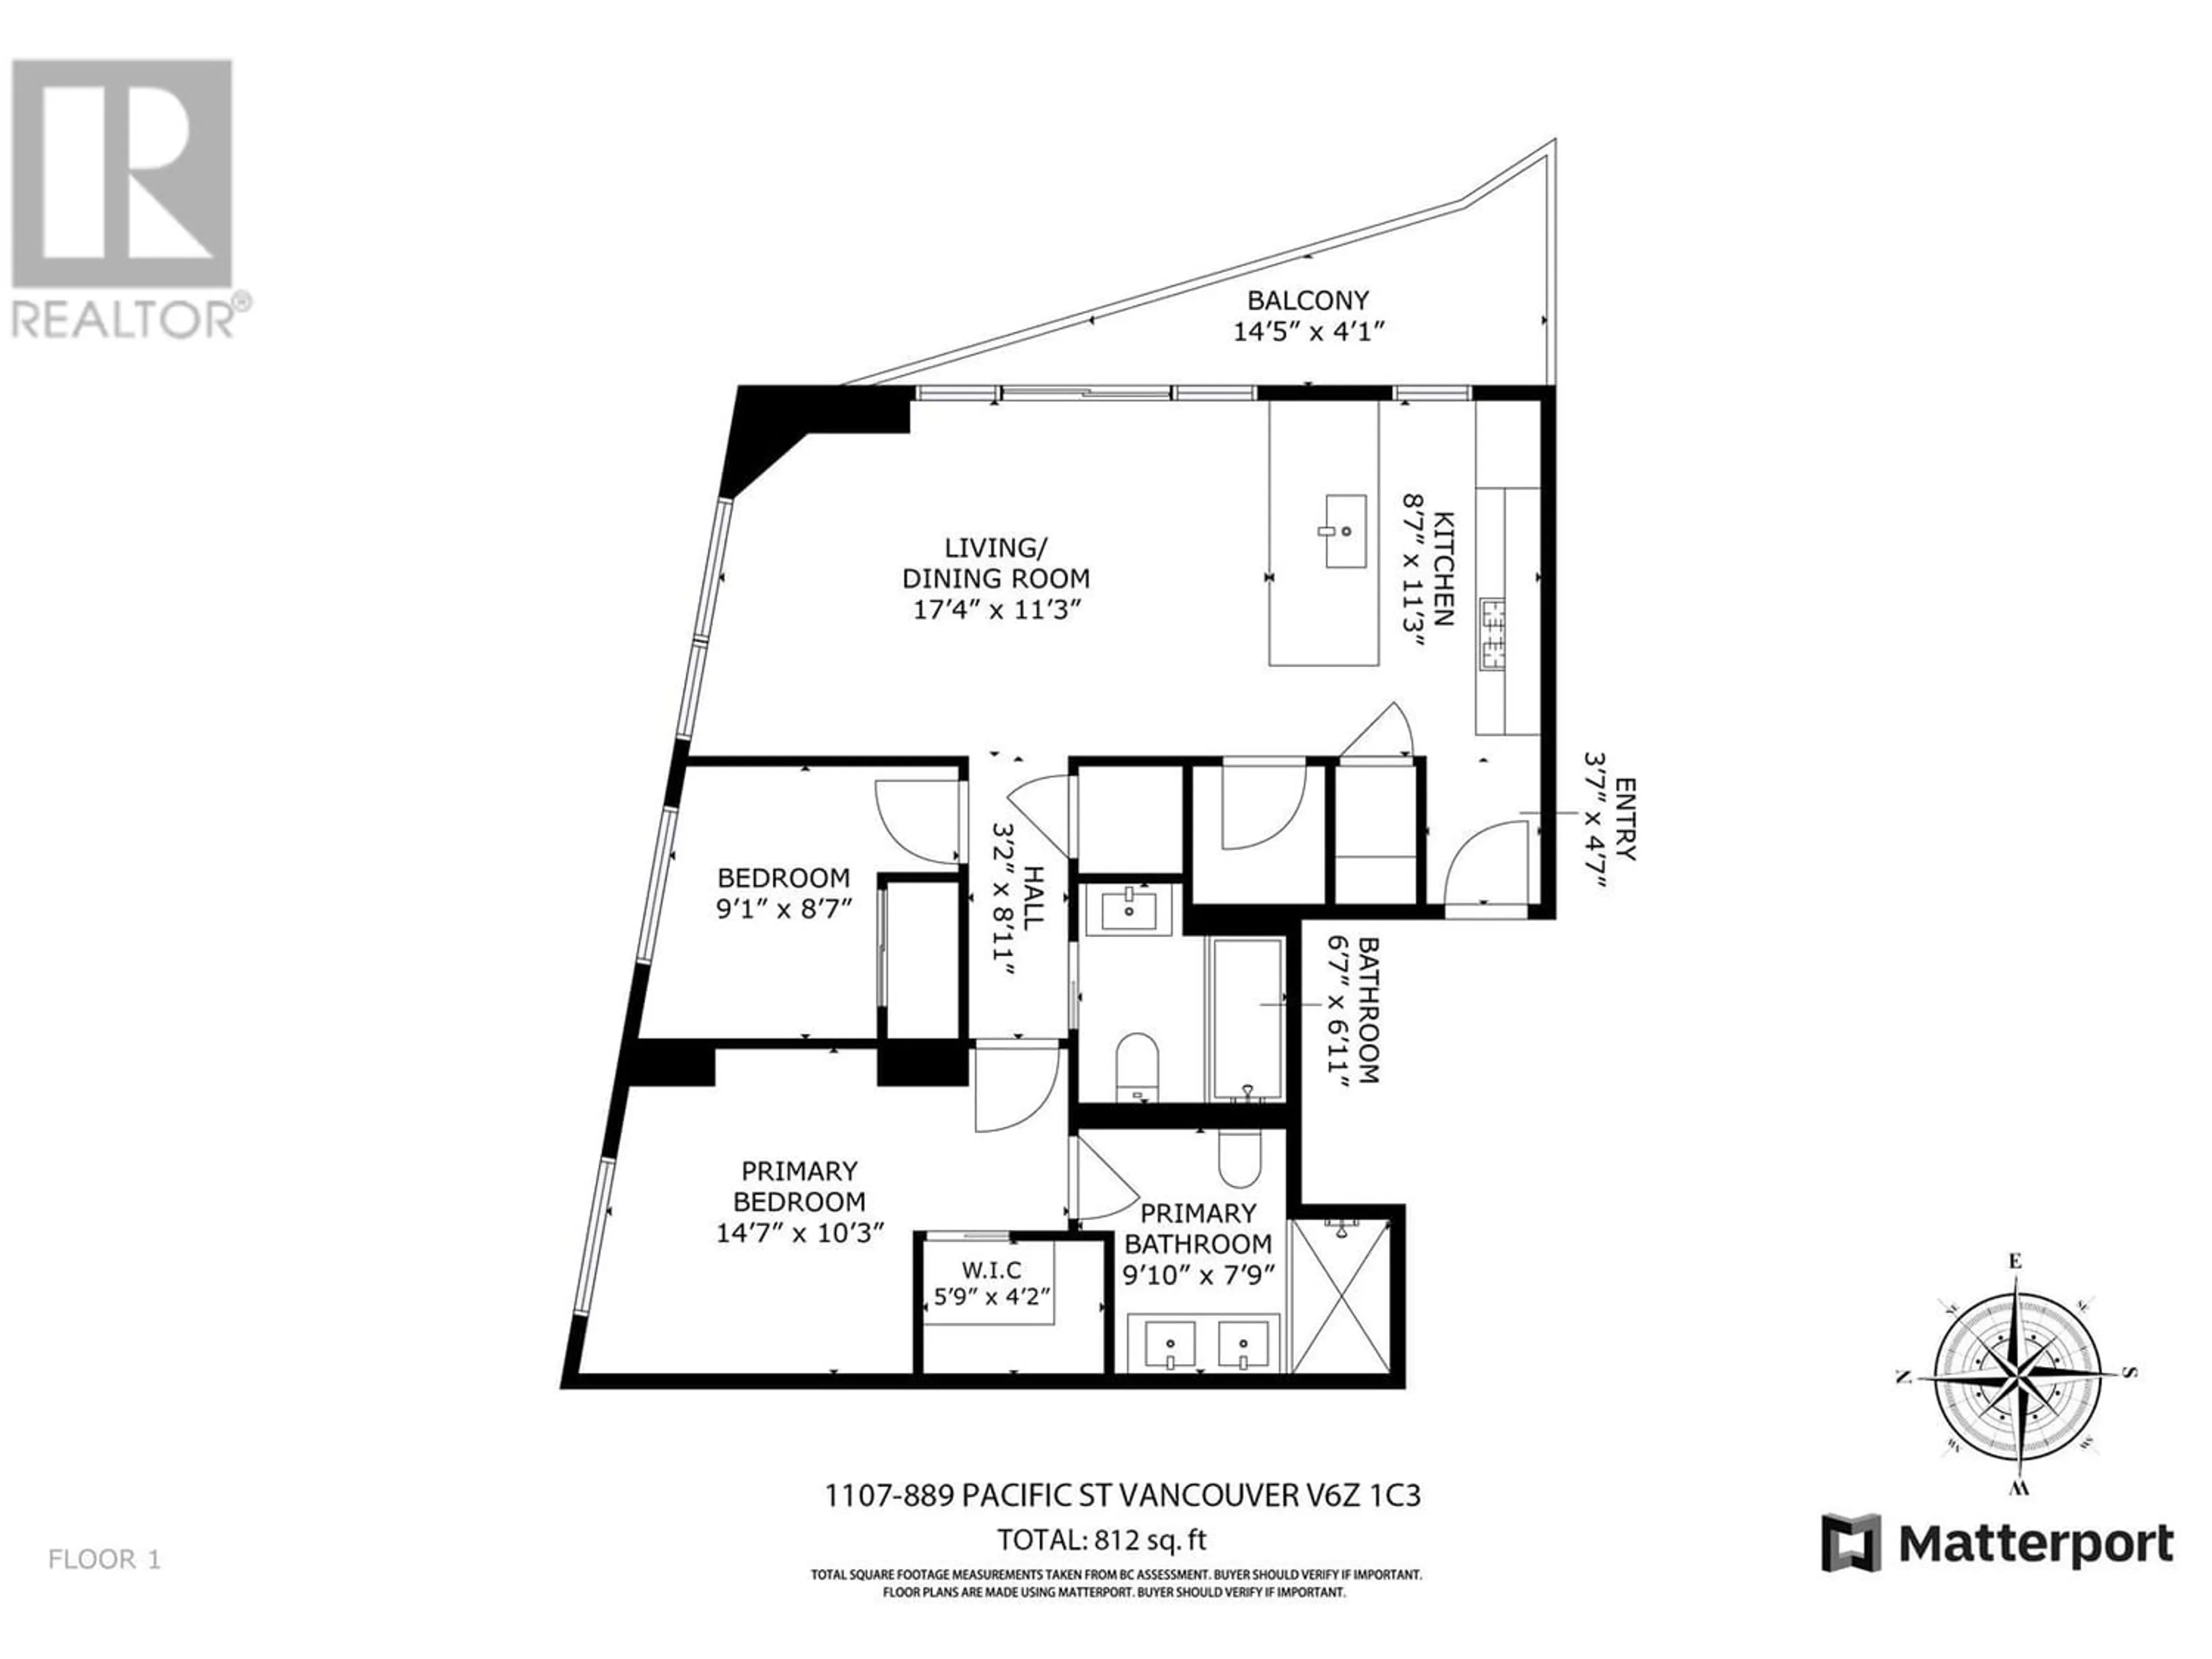 Floor plan for 1107 889 PACIFIC STREET, Vancouver British Columbia V6Z1C3